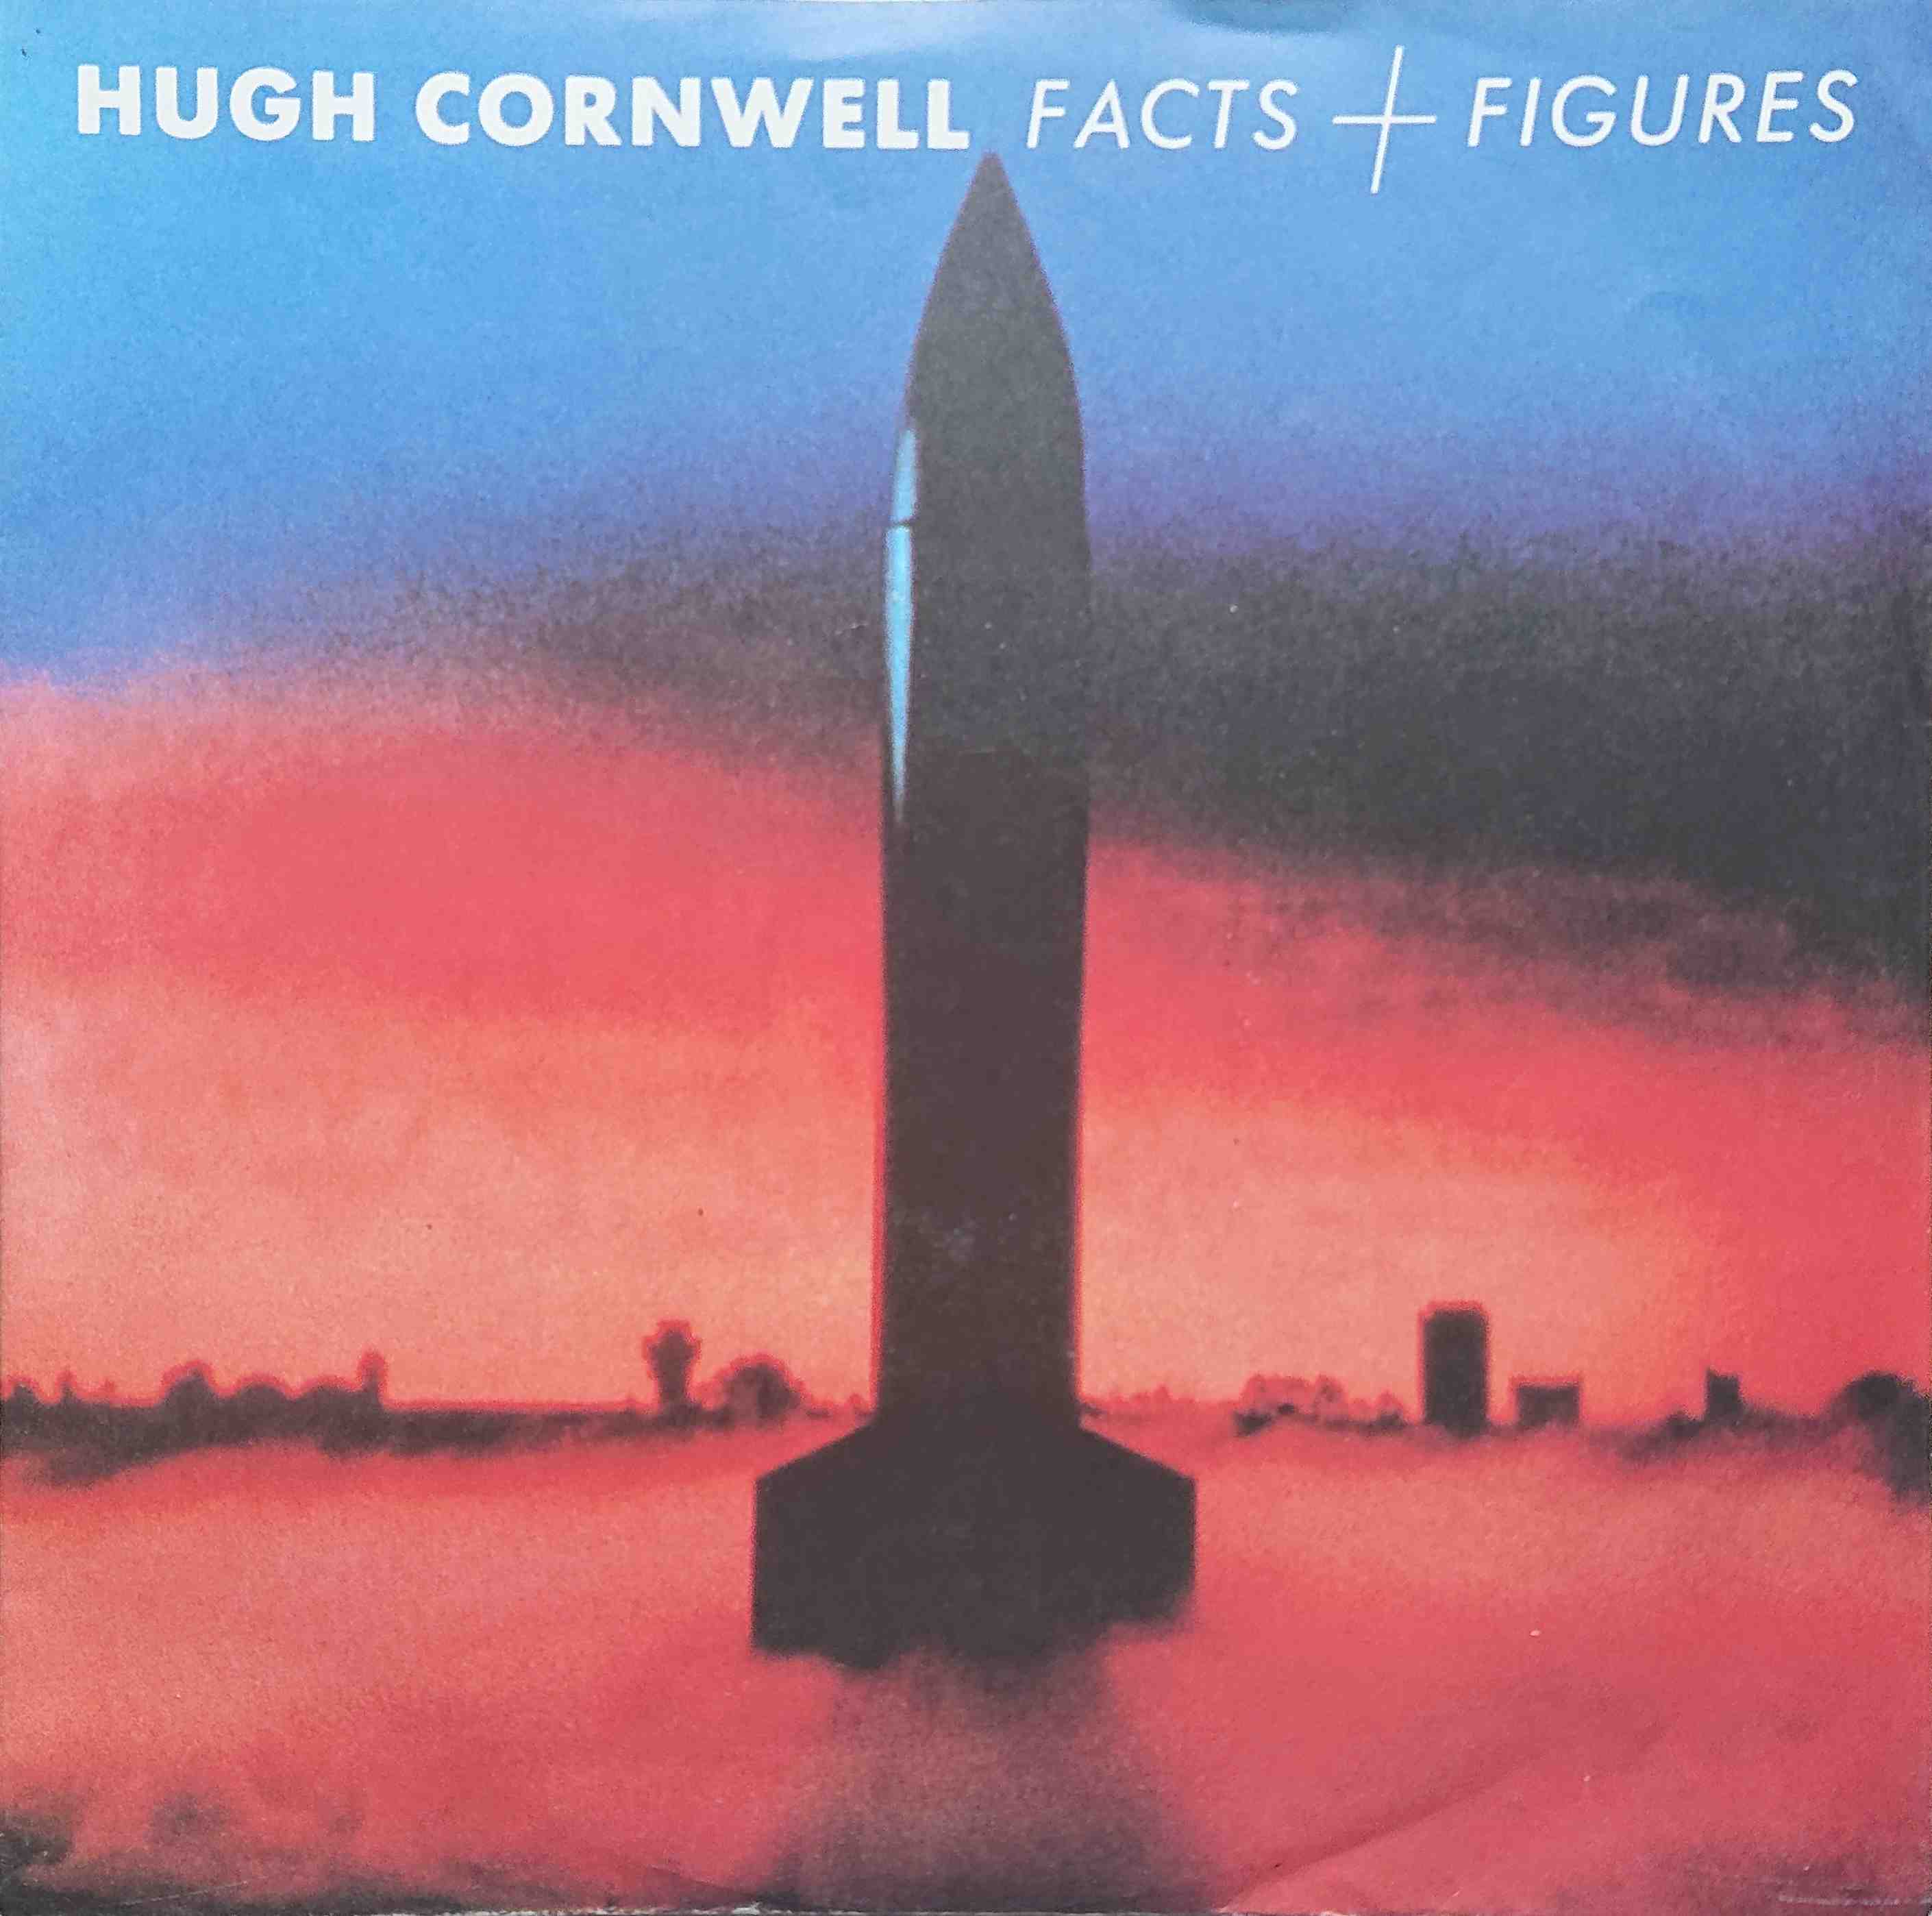 Picture of Facts + figures by artist Hugh Cornwell from The Stranglers singles